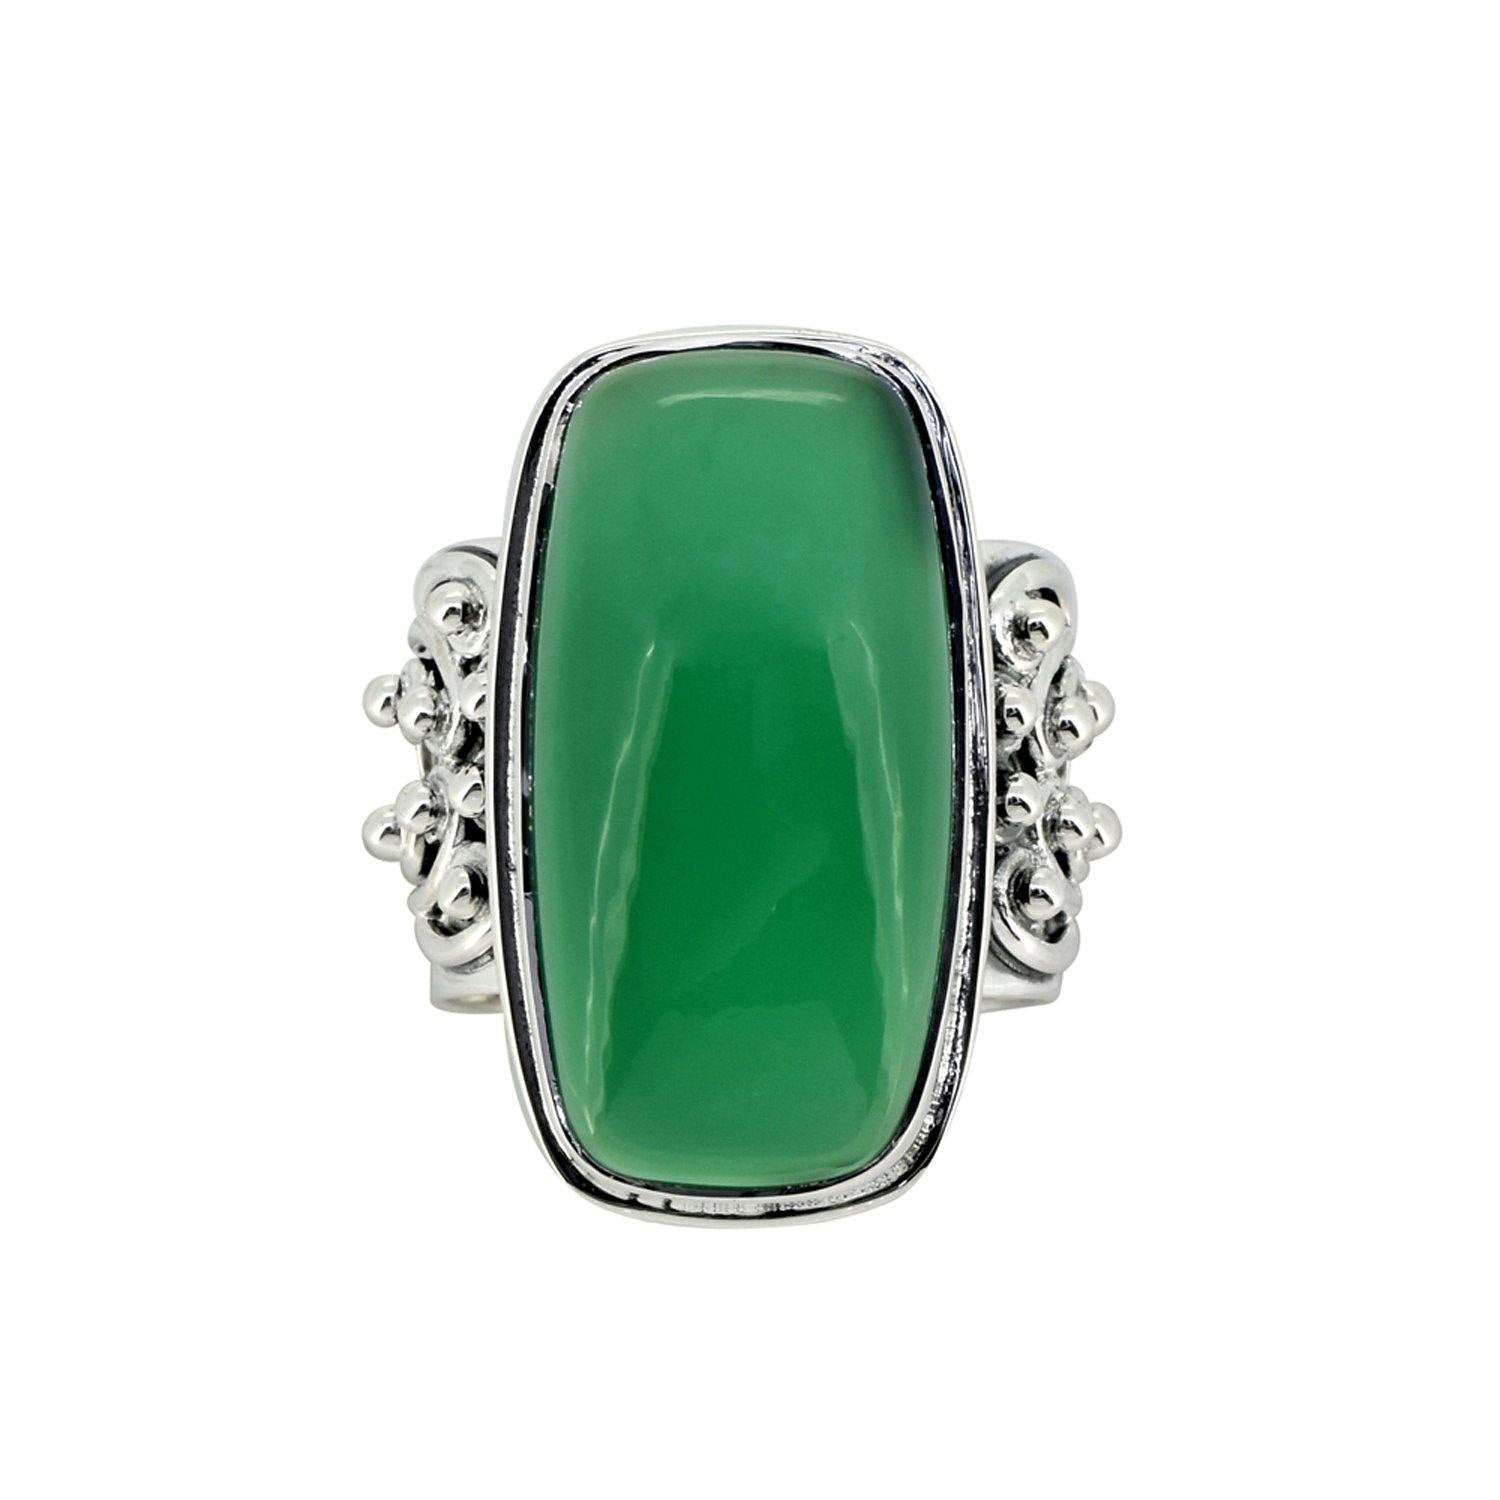 Green Onyx Solid 925 Sterling Silver Ring Jewelry - YoTreasure